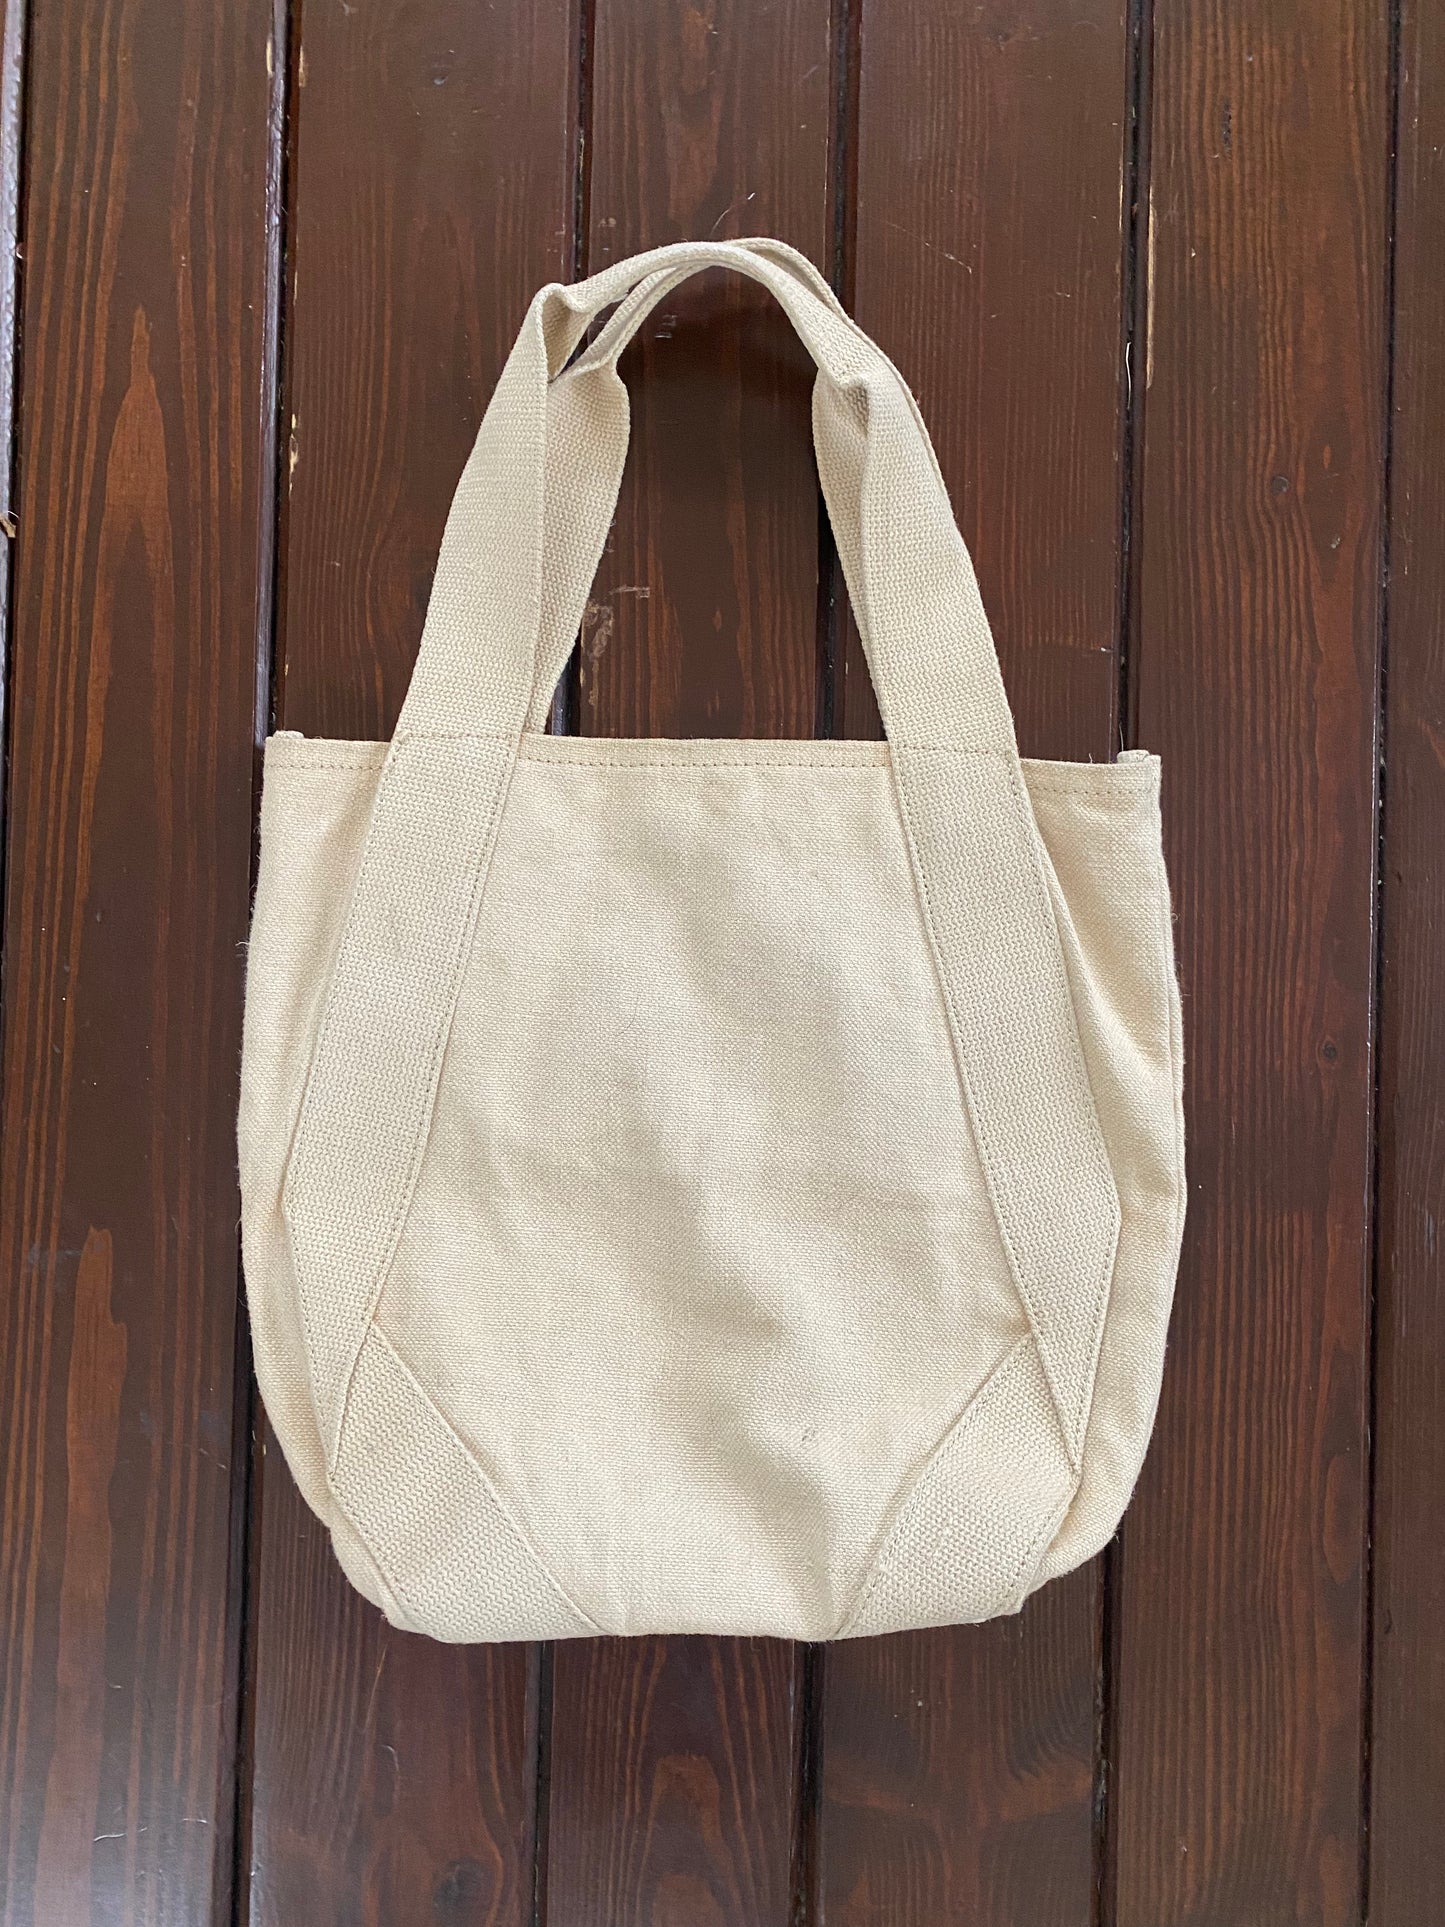 Marc Jacob’s Tote Bag - Brimm Archive Wardrobe Research